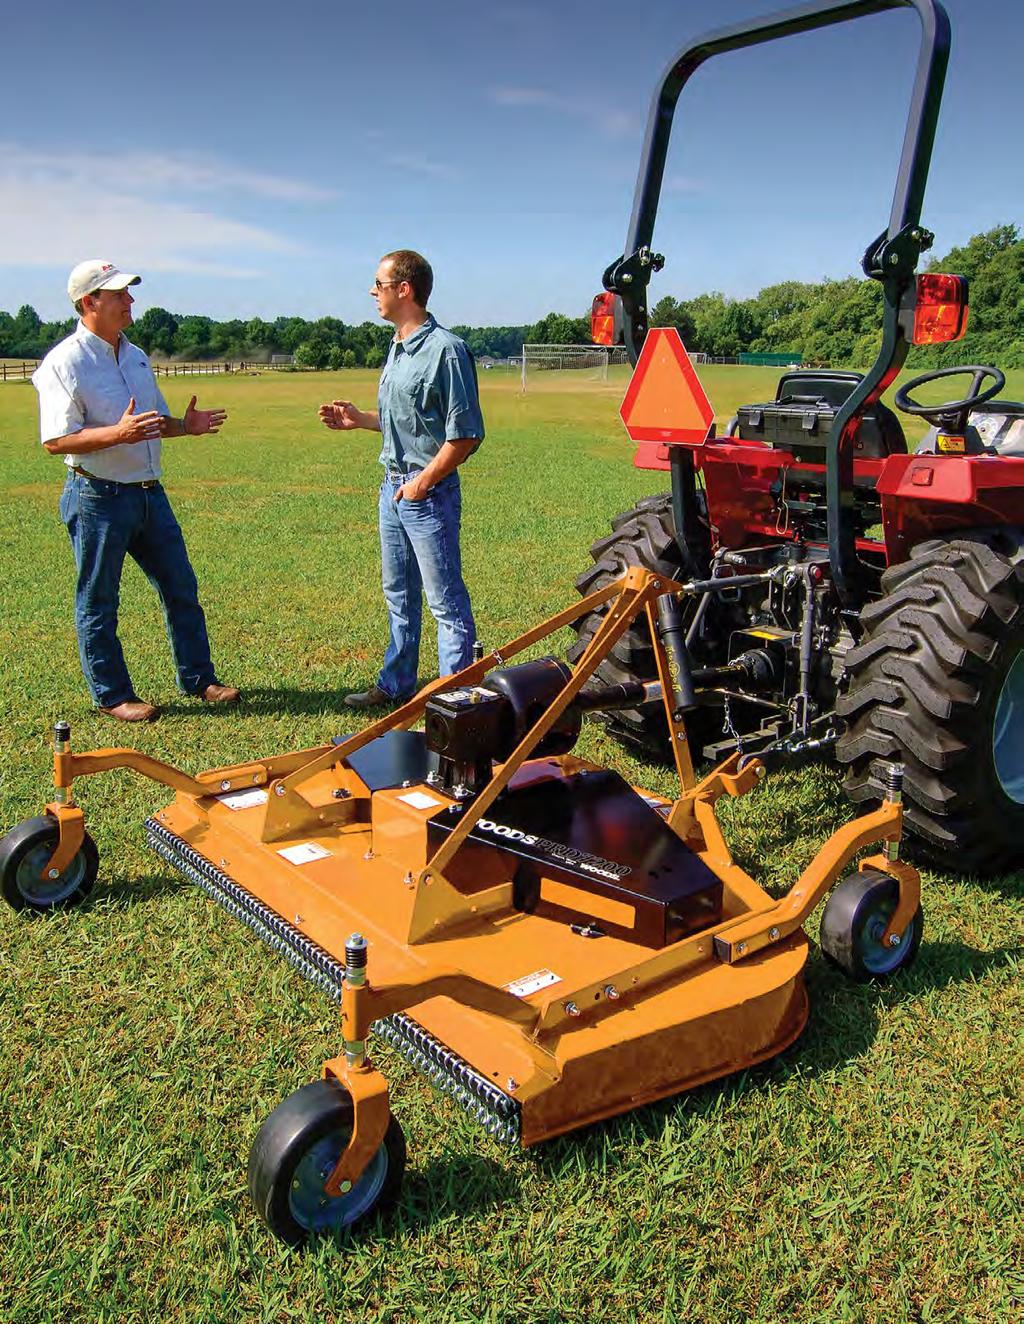 Discover the premium cut quality that makes Woods the undisputed leader in finish mowers PRD7200 Shown with optional chain shielding Every